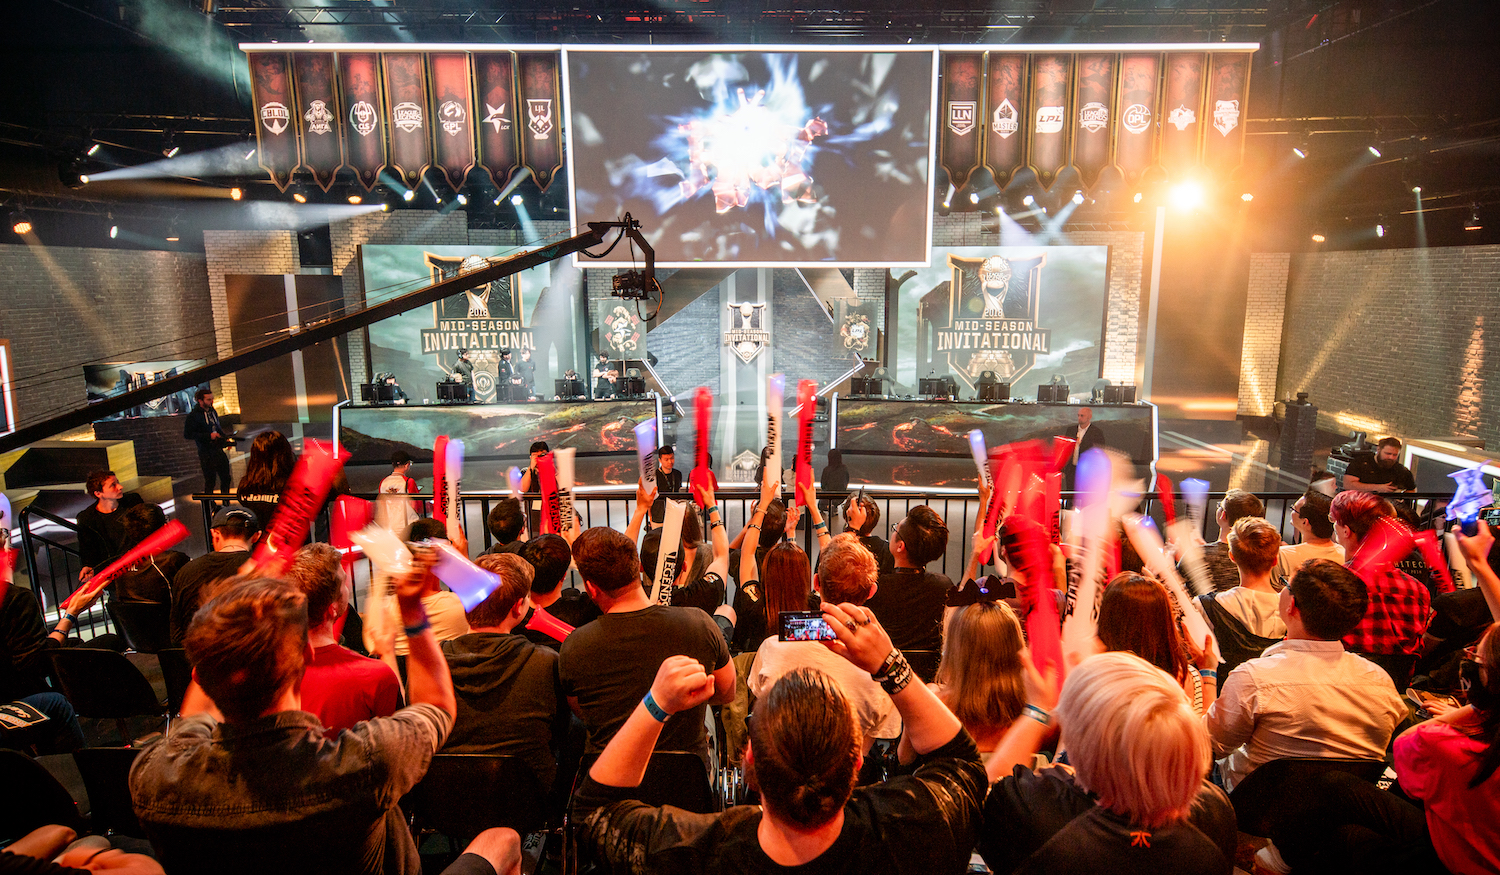 BERLIN, GERMANY - MAY 14 : Fans cheering to game stage during the 2018 League of Legends Mid-Season Invitational Groups Stage at the EU LCS Studio on May 14, 2018 in Berlin, Germany. (Photo by Wojciech Wandzel/Riot Games via Getty Images)